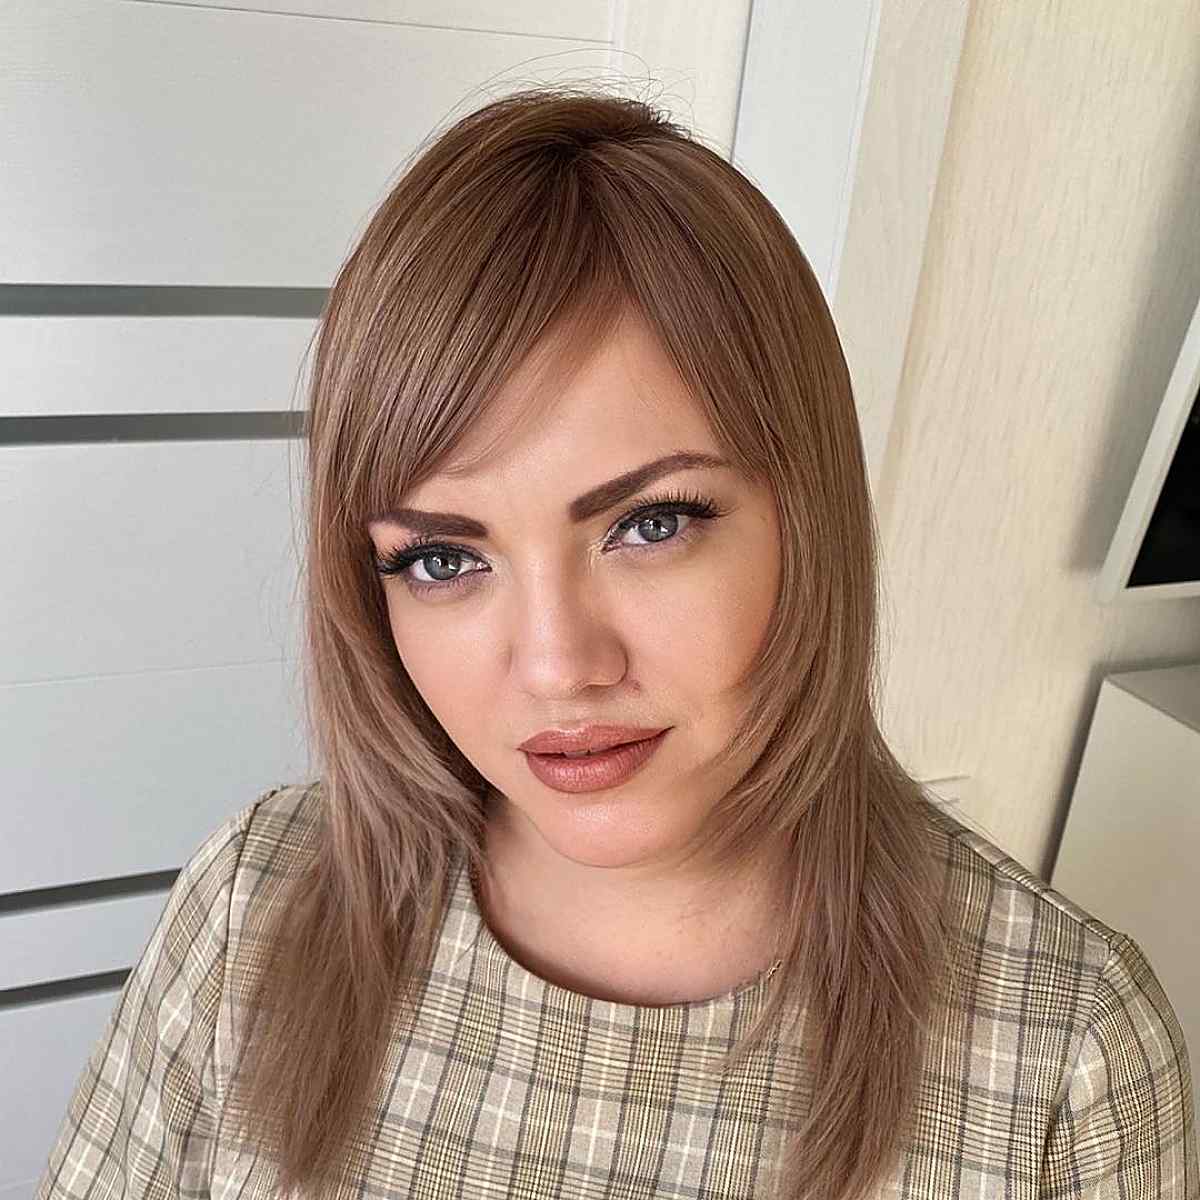 Mid-length layered cut with side bangs